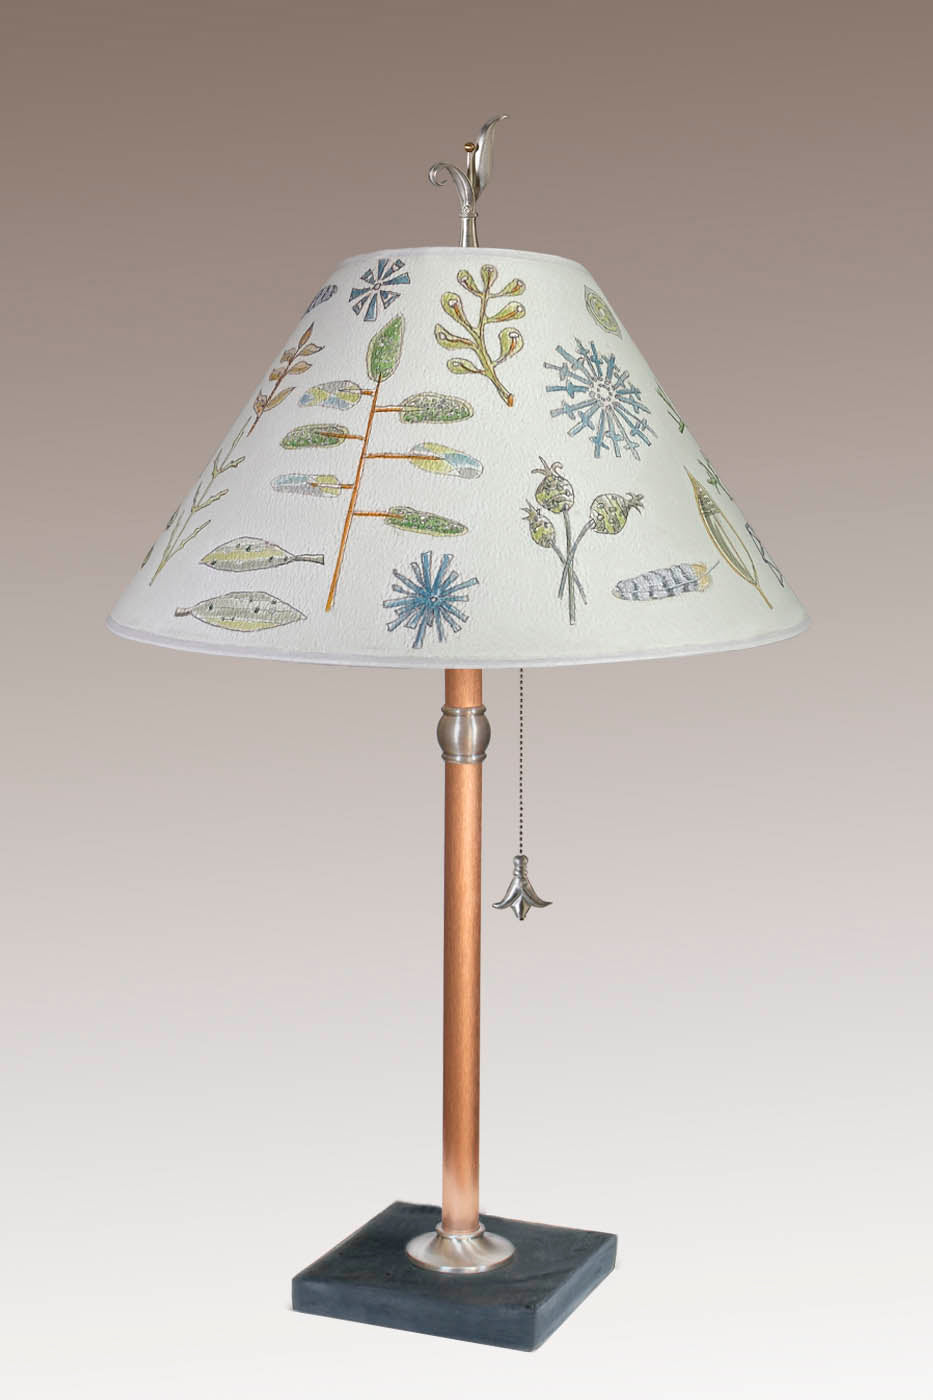 Janna Ugone & Co Table Lamp Copper Table Lamp with Large Conical Shade in Field Chart